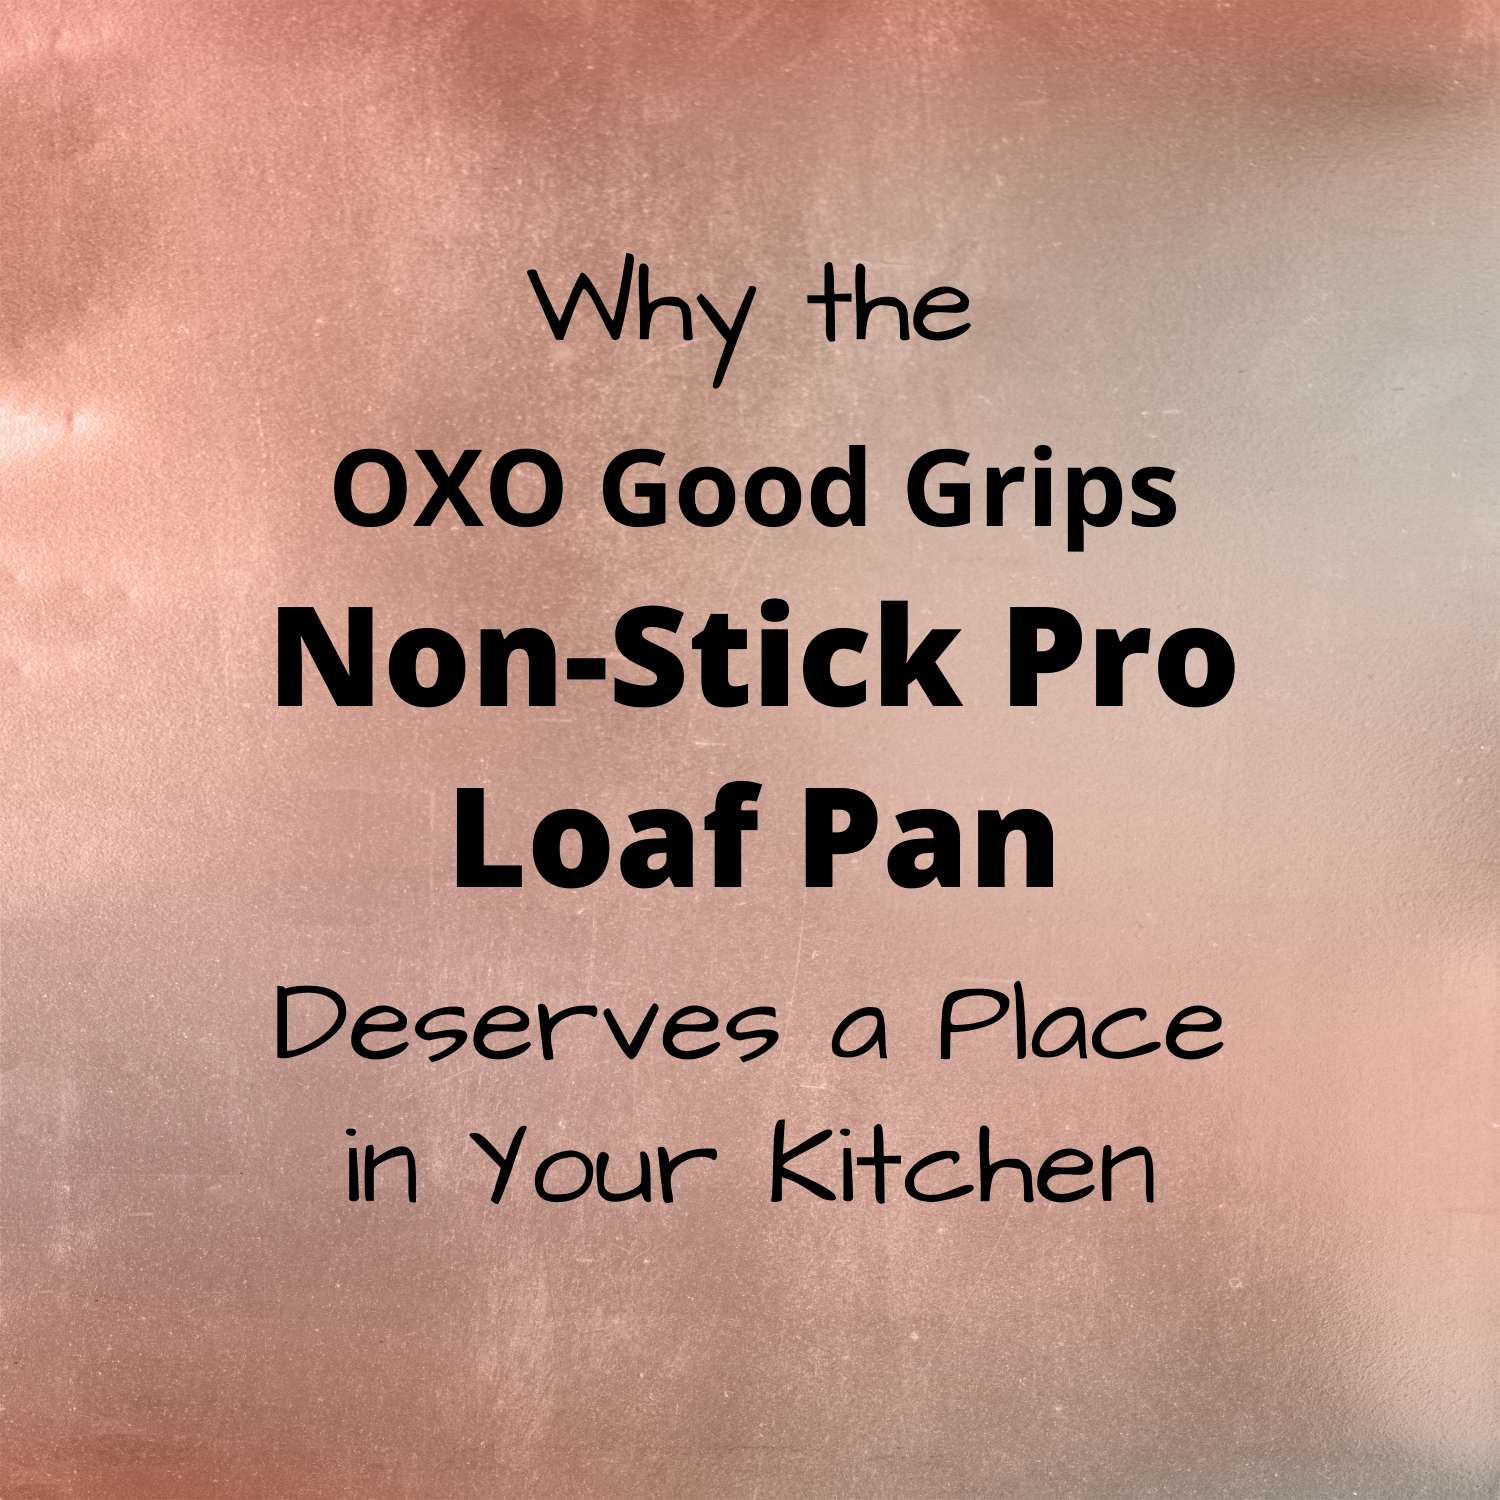 OXO Good Grips Non-Stick Pro Loaf Pan Review